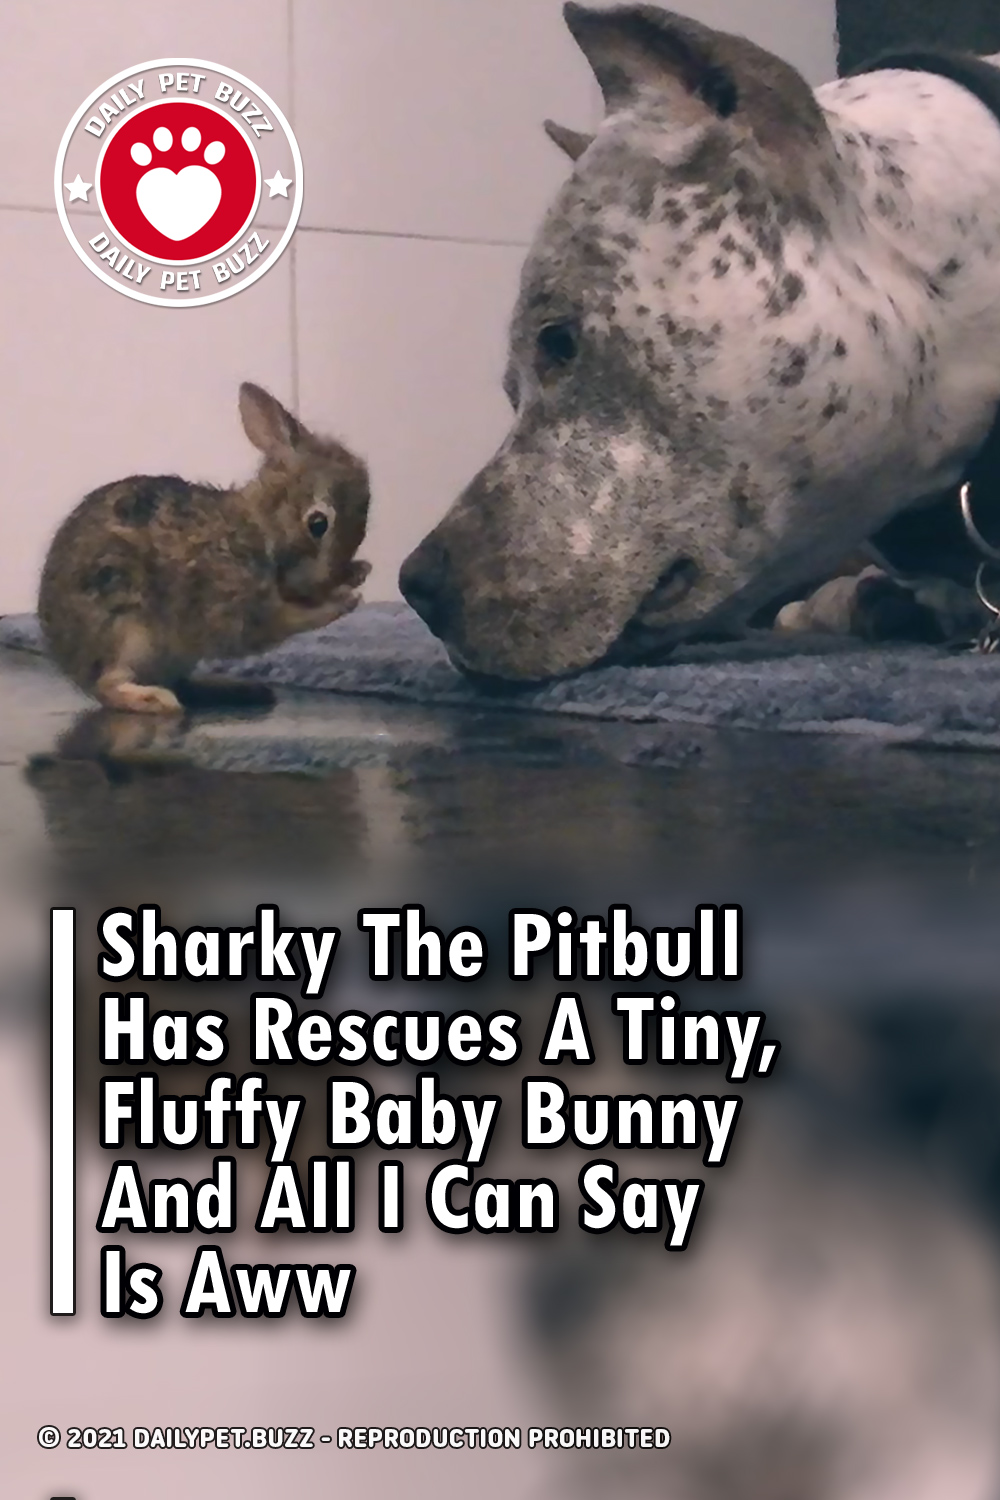 Sharky The Pitbull Has Rescues A Tiny, Fluffy Baby Bunny And All I Can Say Is Aww